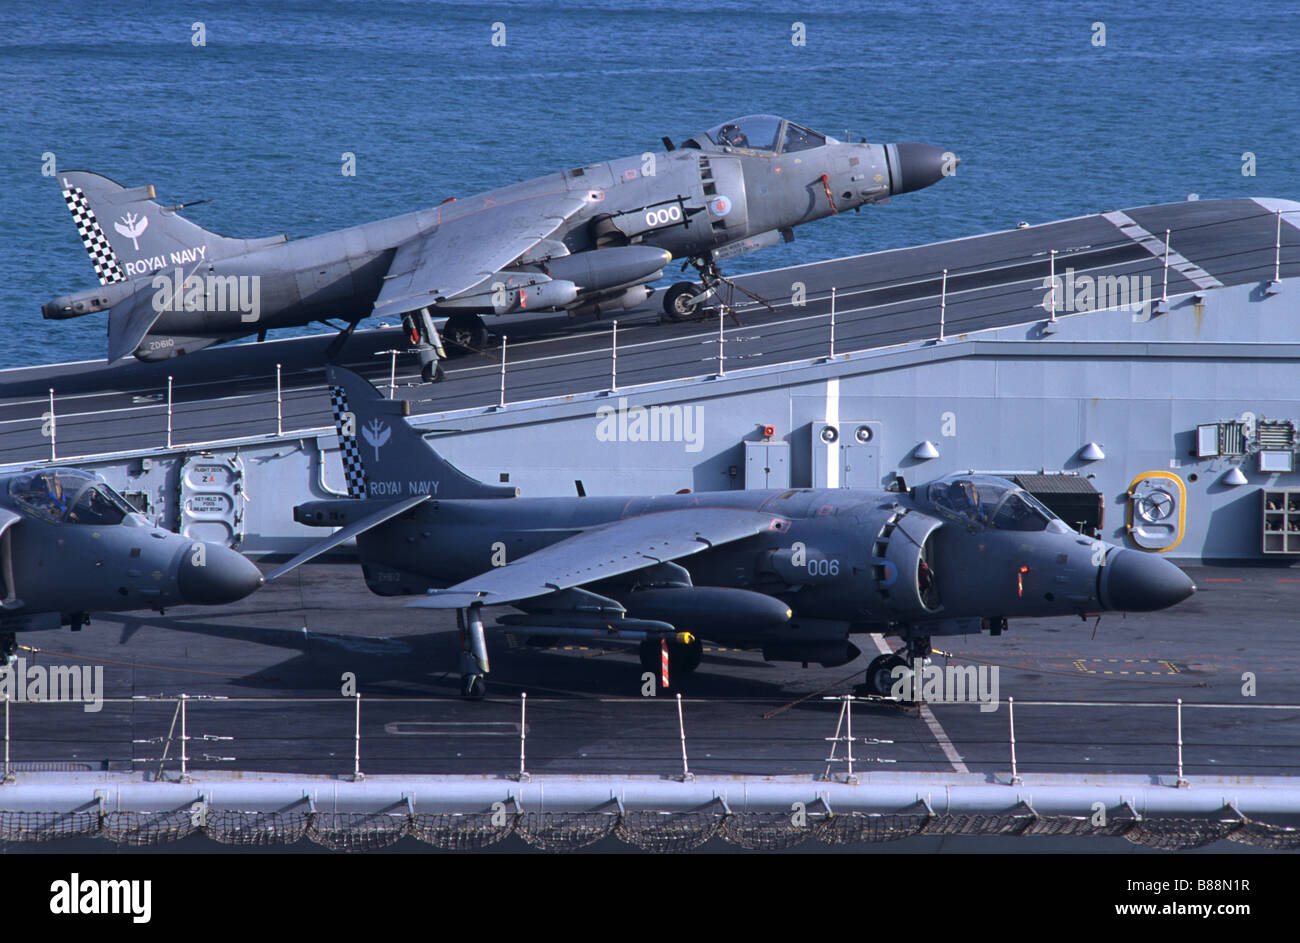 Harrier Jets on the British Aircraft Carrier HMS Illustrious in the Grand or Great Harbour or Harbor of Valletta, Malta Stock Photo